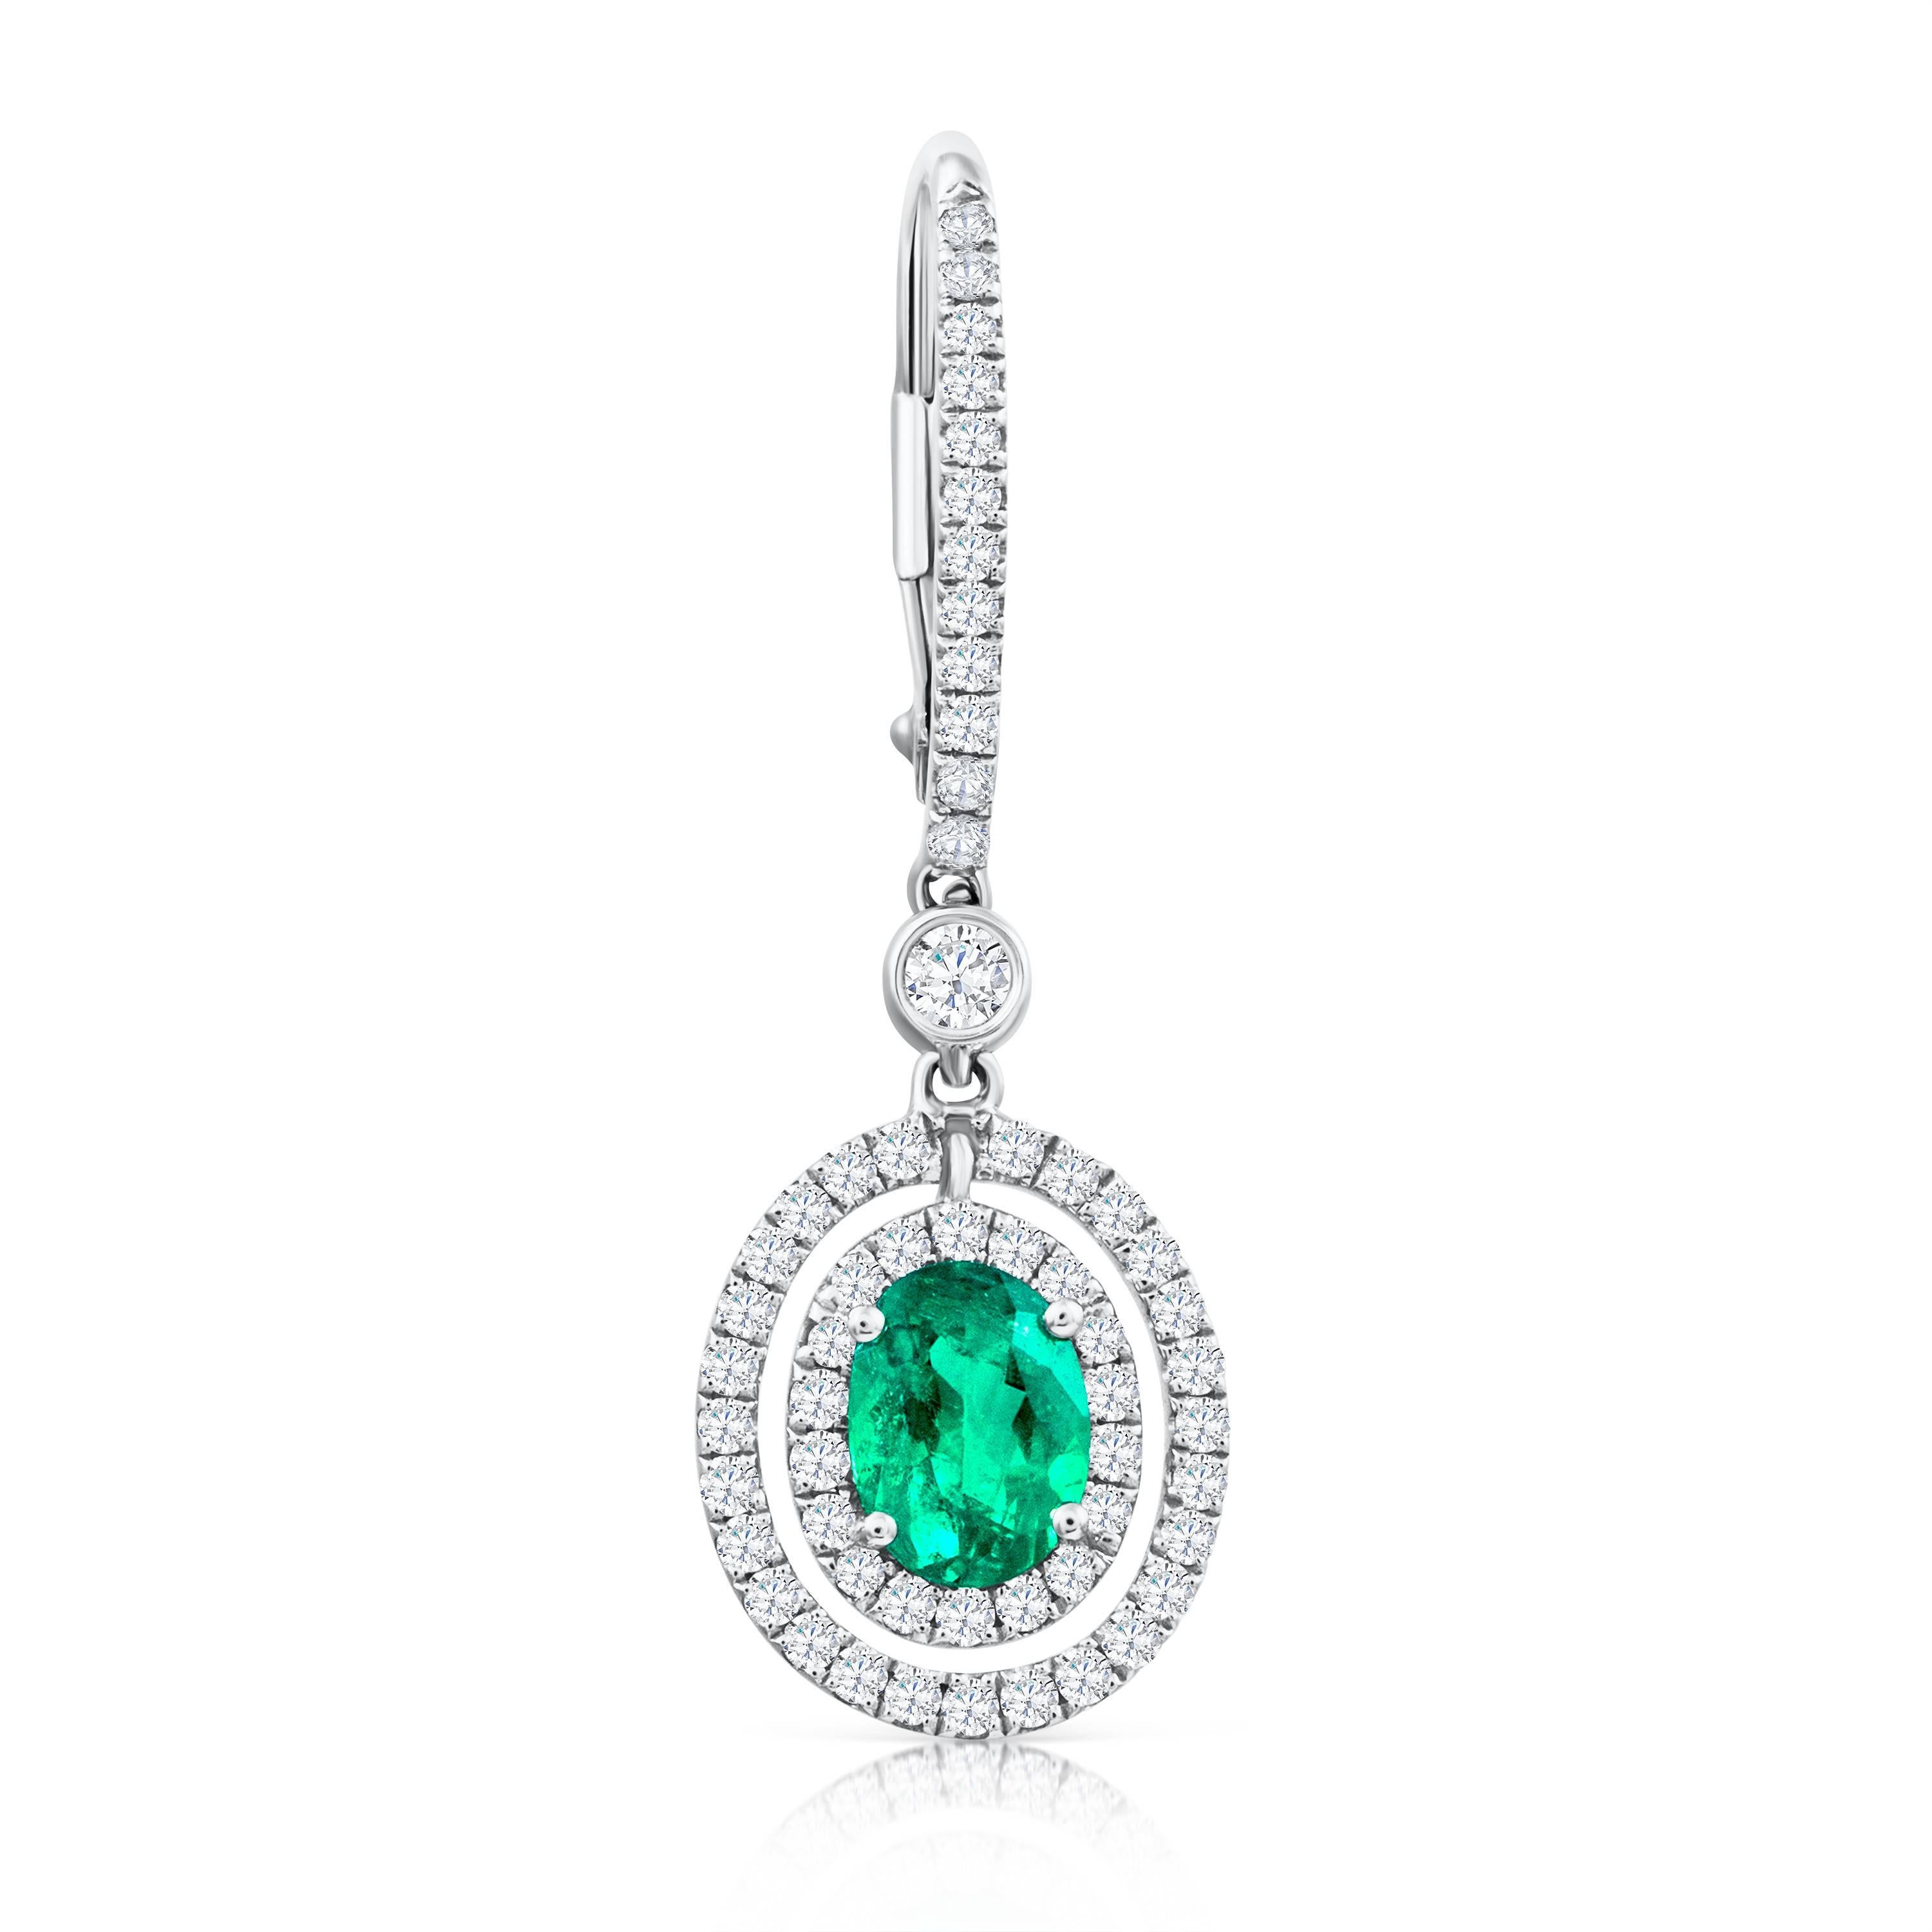 Simple but elegant 18k white gold dangle earrings set with 2 oval cut green emeralds weighing 1.01 carats total. The emeralds are surrounded by 2 rows of brilliant round diamonds weighing 0.63 carats suspended on an accented lever-back. Spaced by a